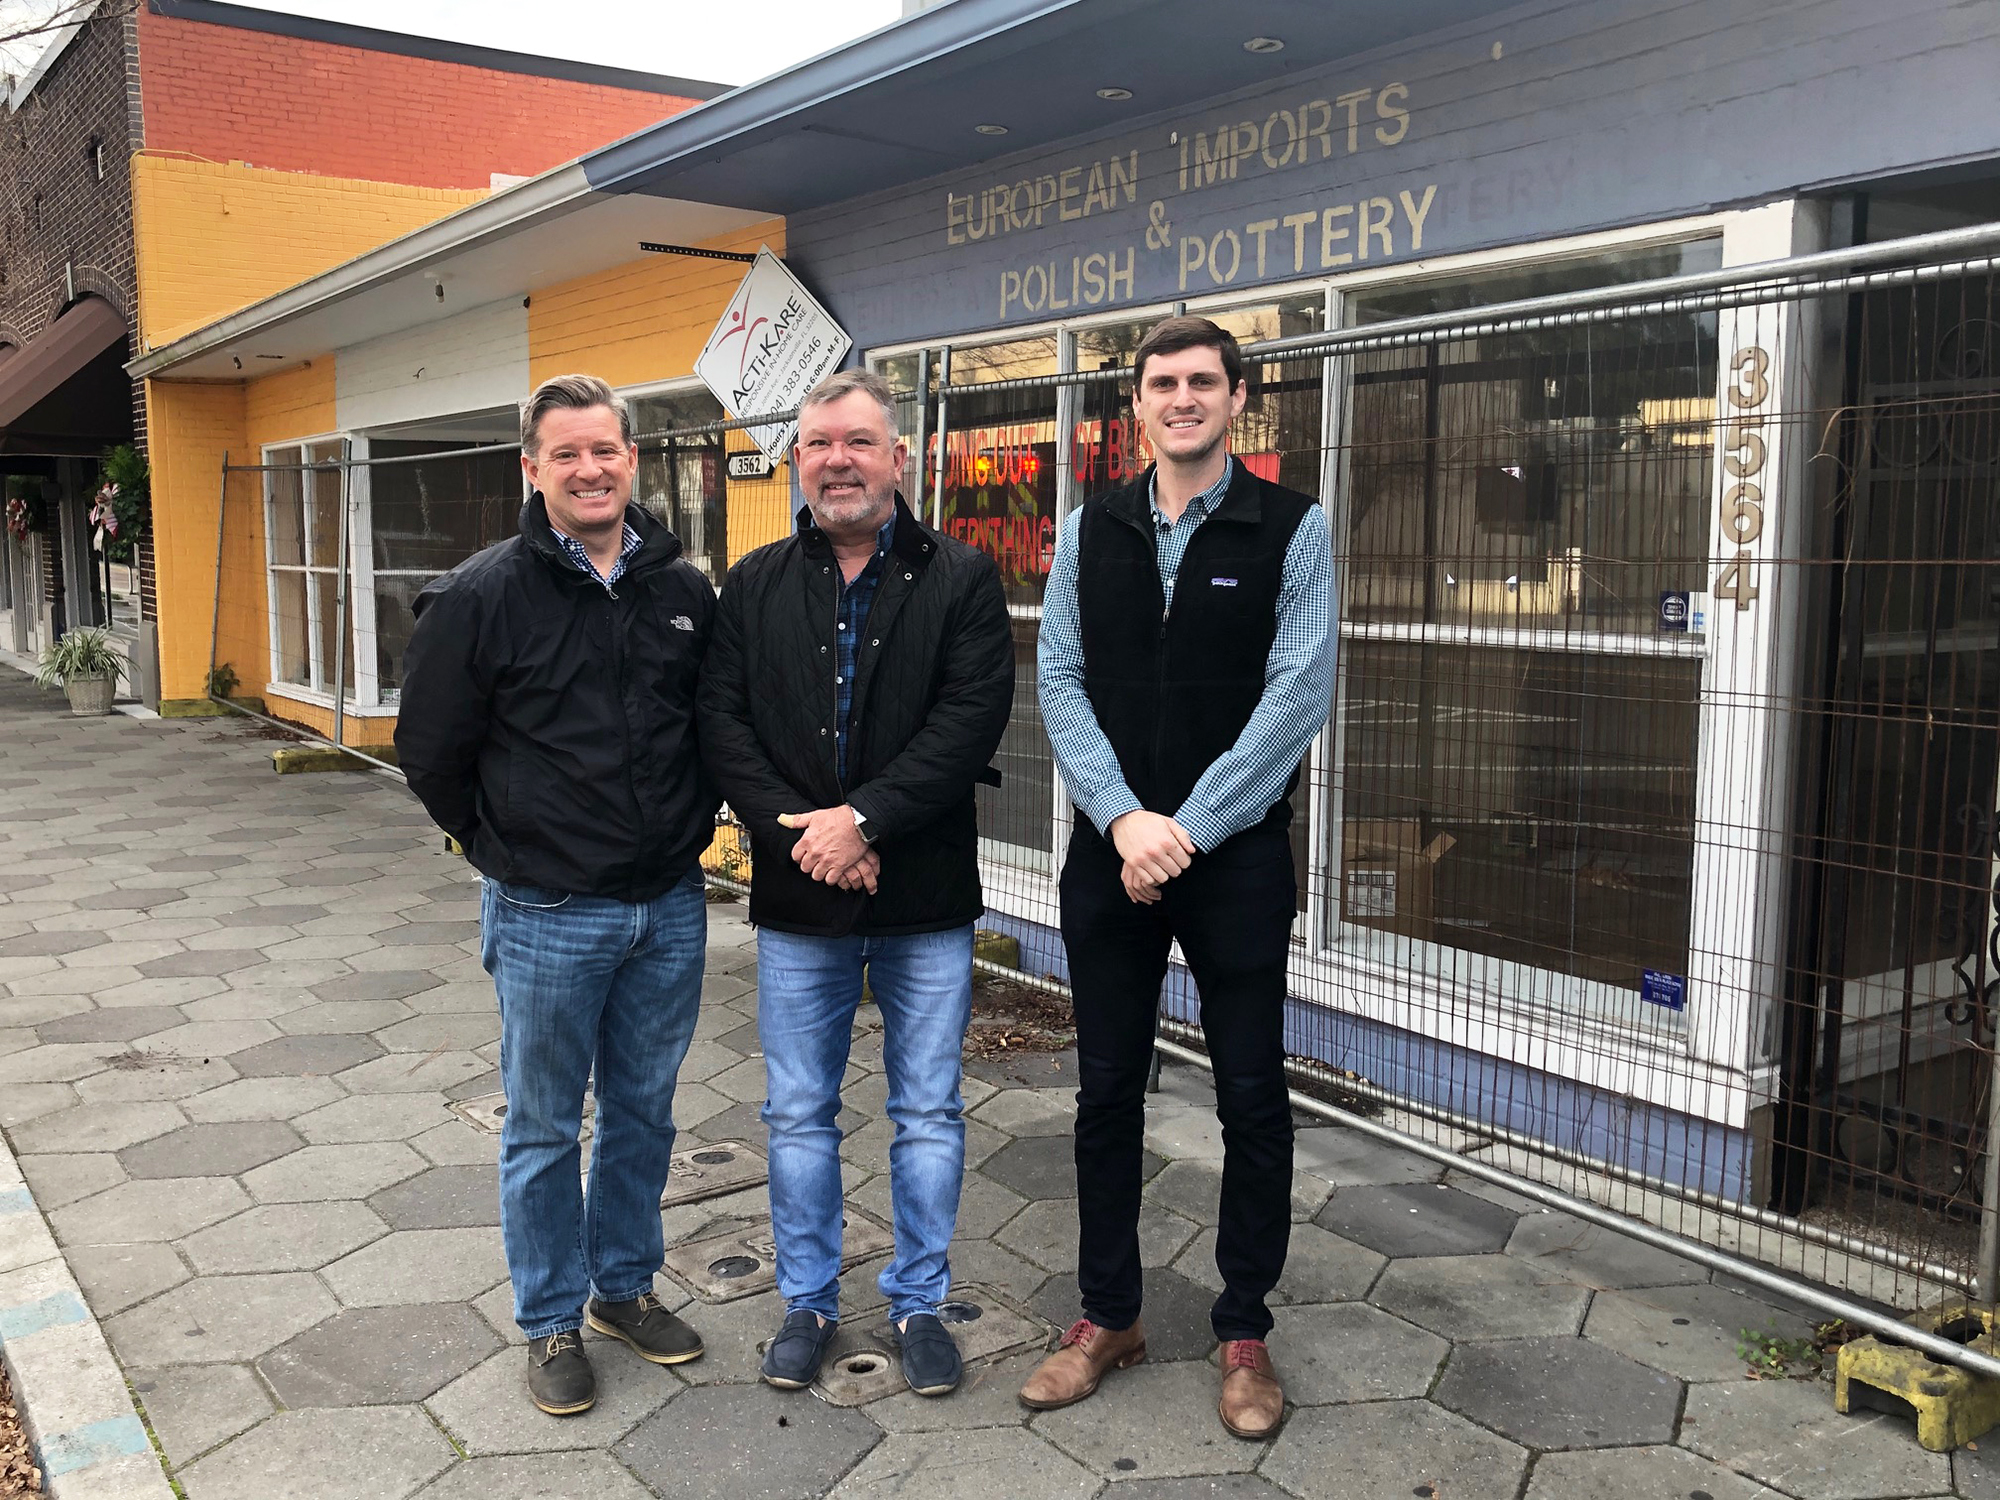 Southern Grounds & Co. business owner Mark Janasik, property owner Edward Skinner Jones and Chris Goodin, a consultant, at 3562 St. Johns Ave. in the Shoppes of Avondale.